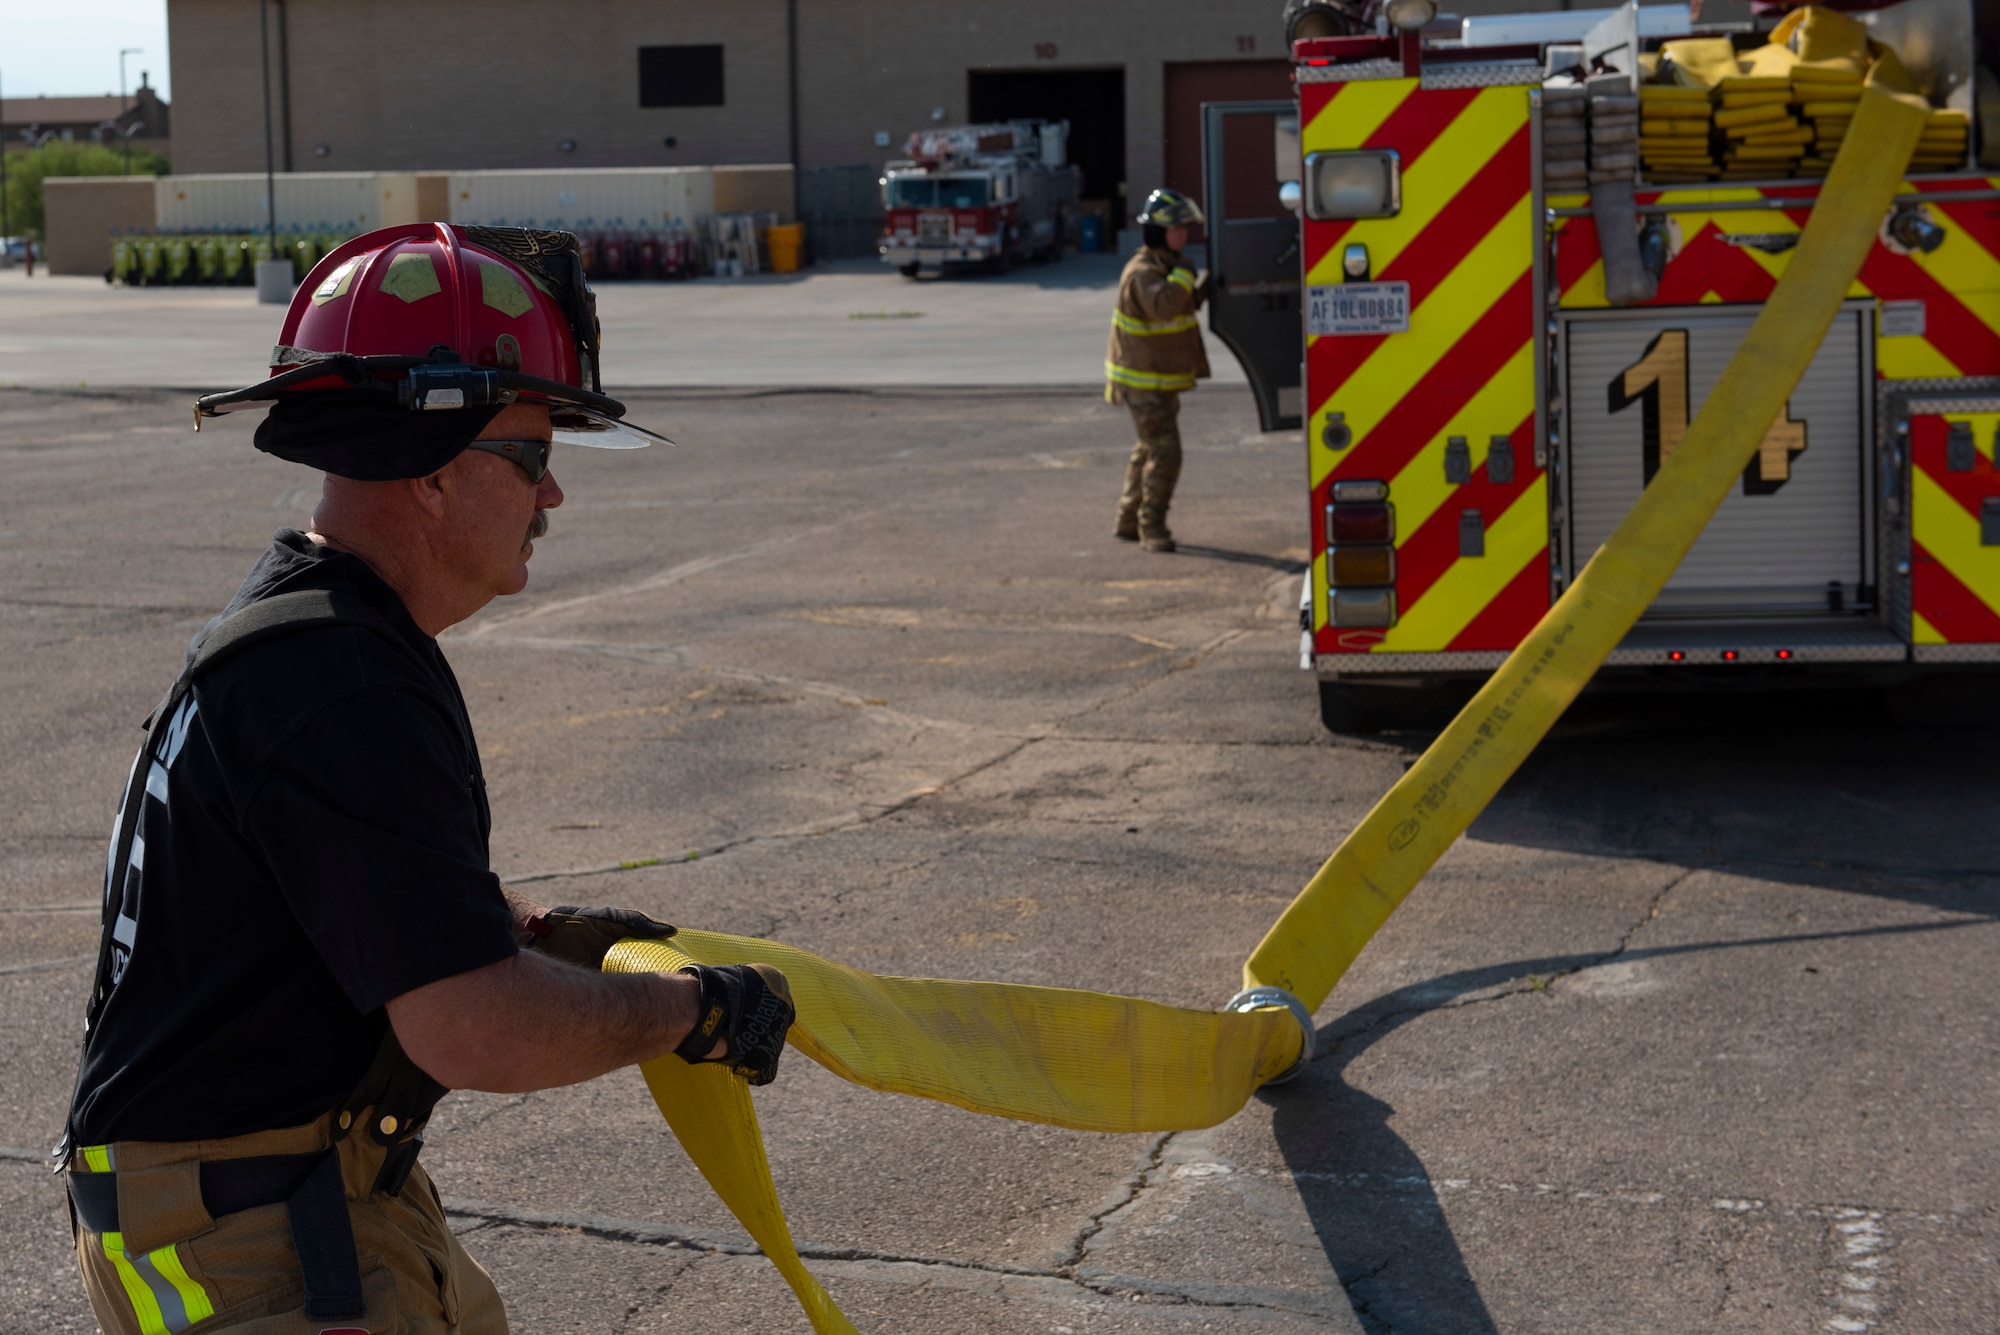 Norman Bloom, 49th Civil Engineer Squadron company officer, prepares to secure a fire hose during an emergency response training exercise, May 19, 2022, on Holloman Air Force Base, New Mexico.